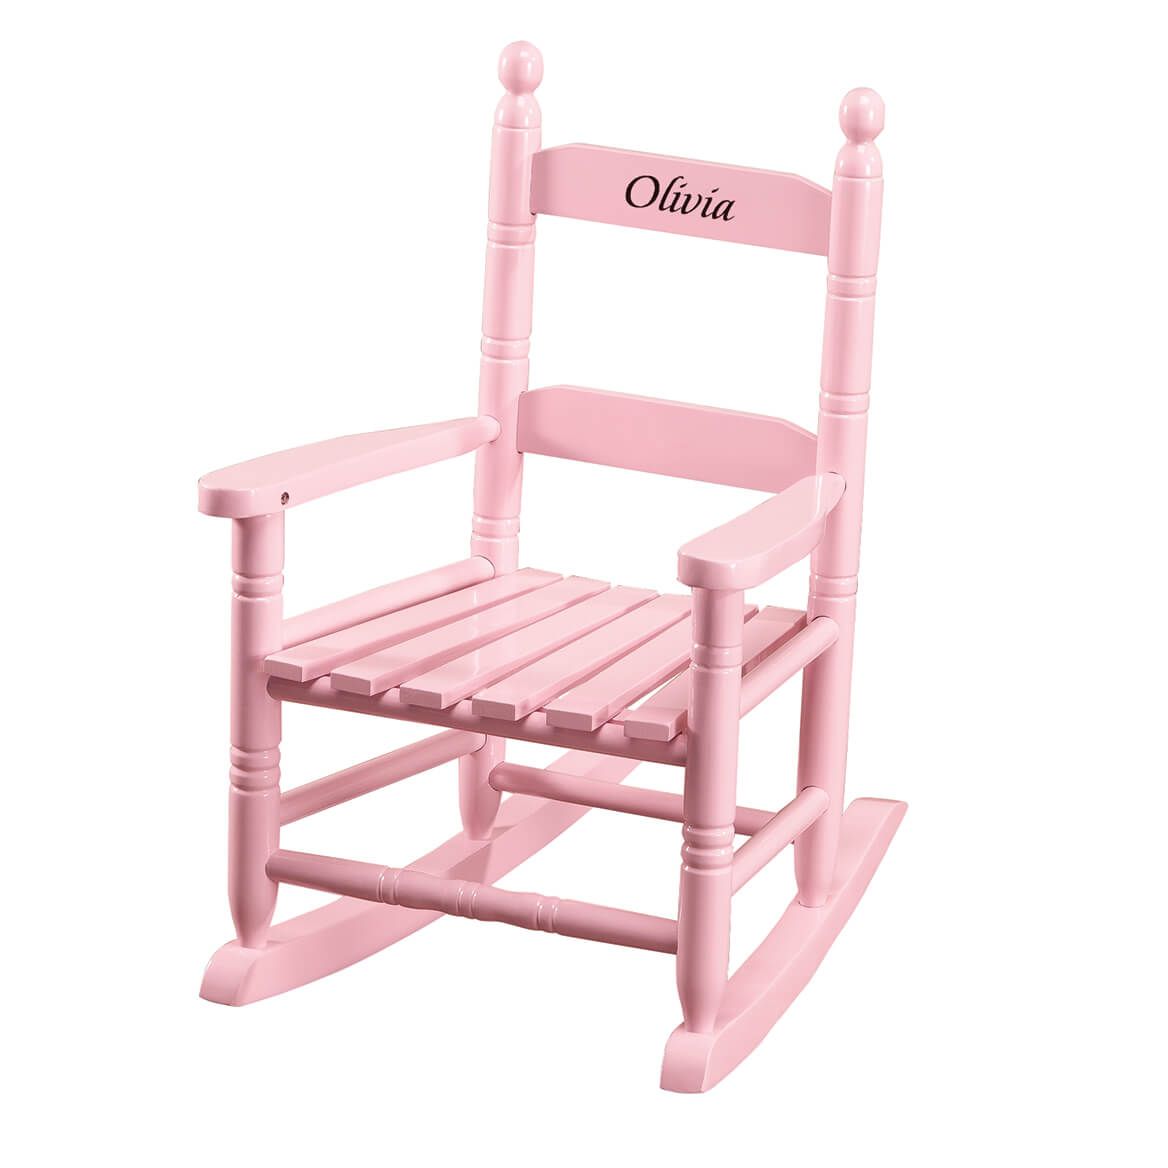 Personalized Children's Rocking Chair, Pink + '-' + 361818